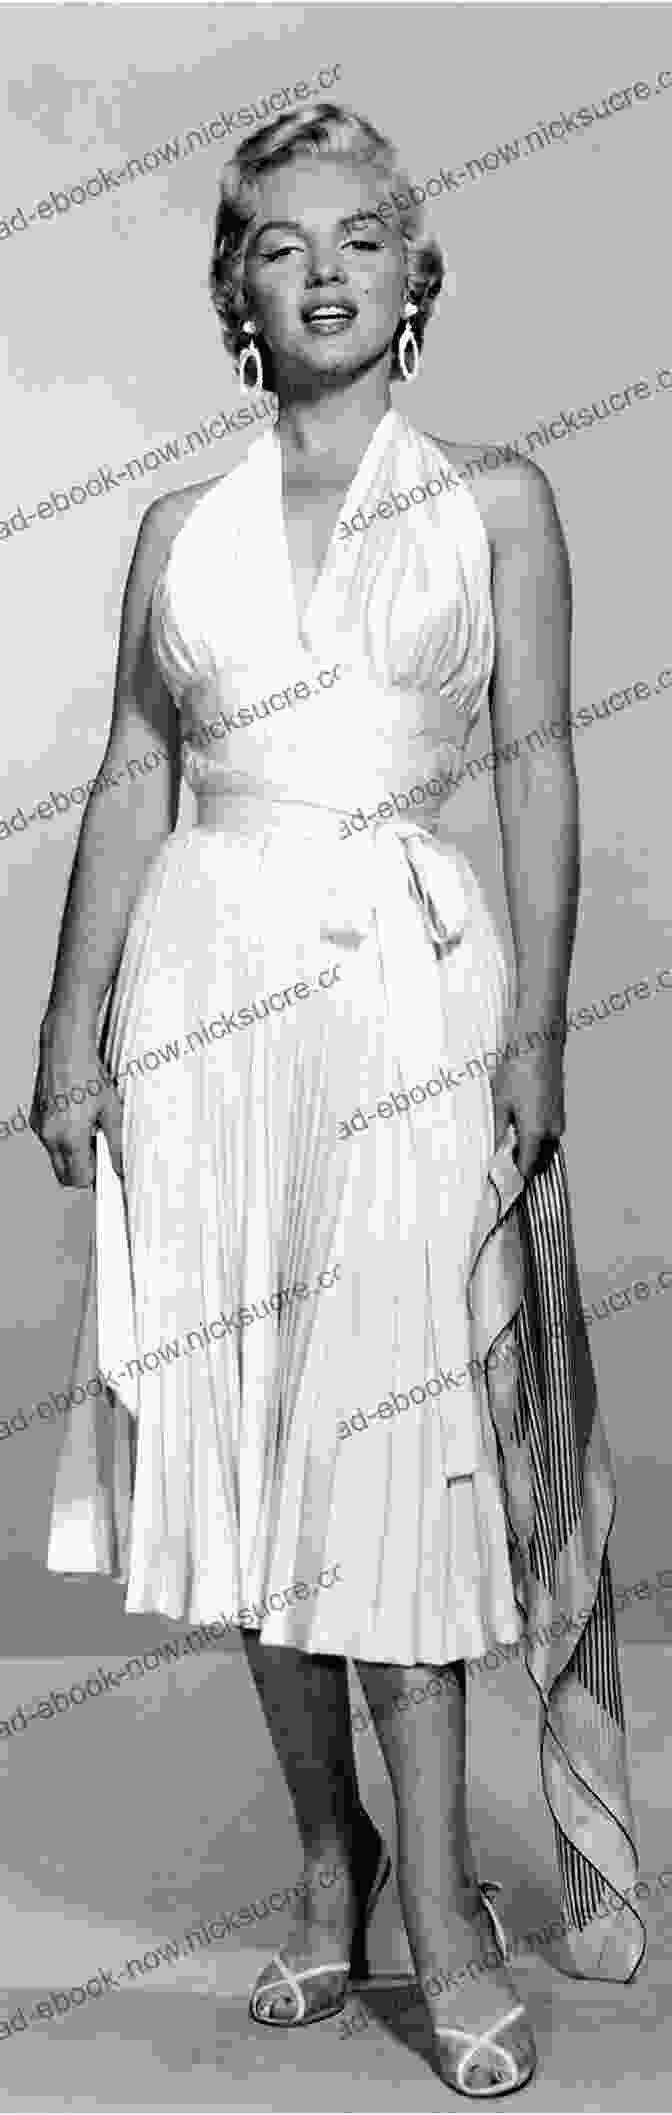 Marilyn Monroe In Her Iconic White Dress Hollywood Most Beautiful Exclusive And Rarest Photos Album Of The Silver Screen Films Superstars Divas Femmes Fatales And Legends Of The Silver Screen Era Of Hollywood Divas And Superstars)